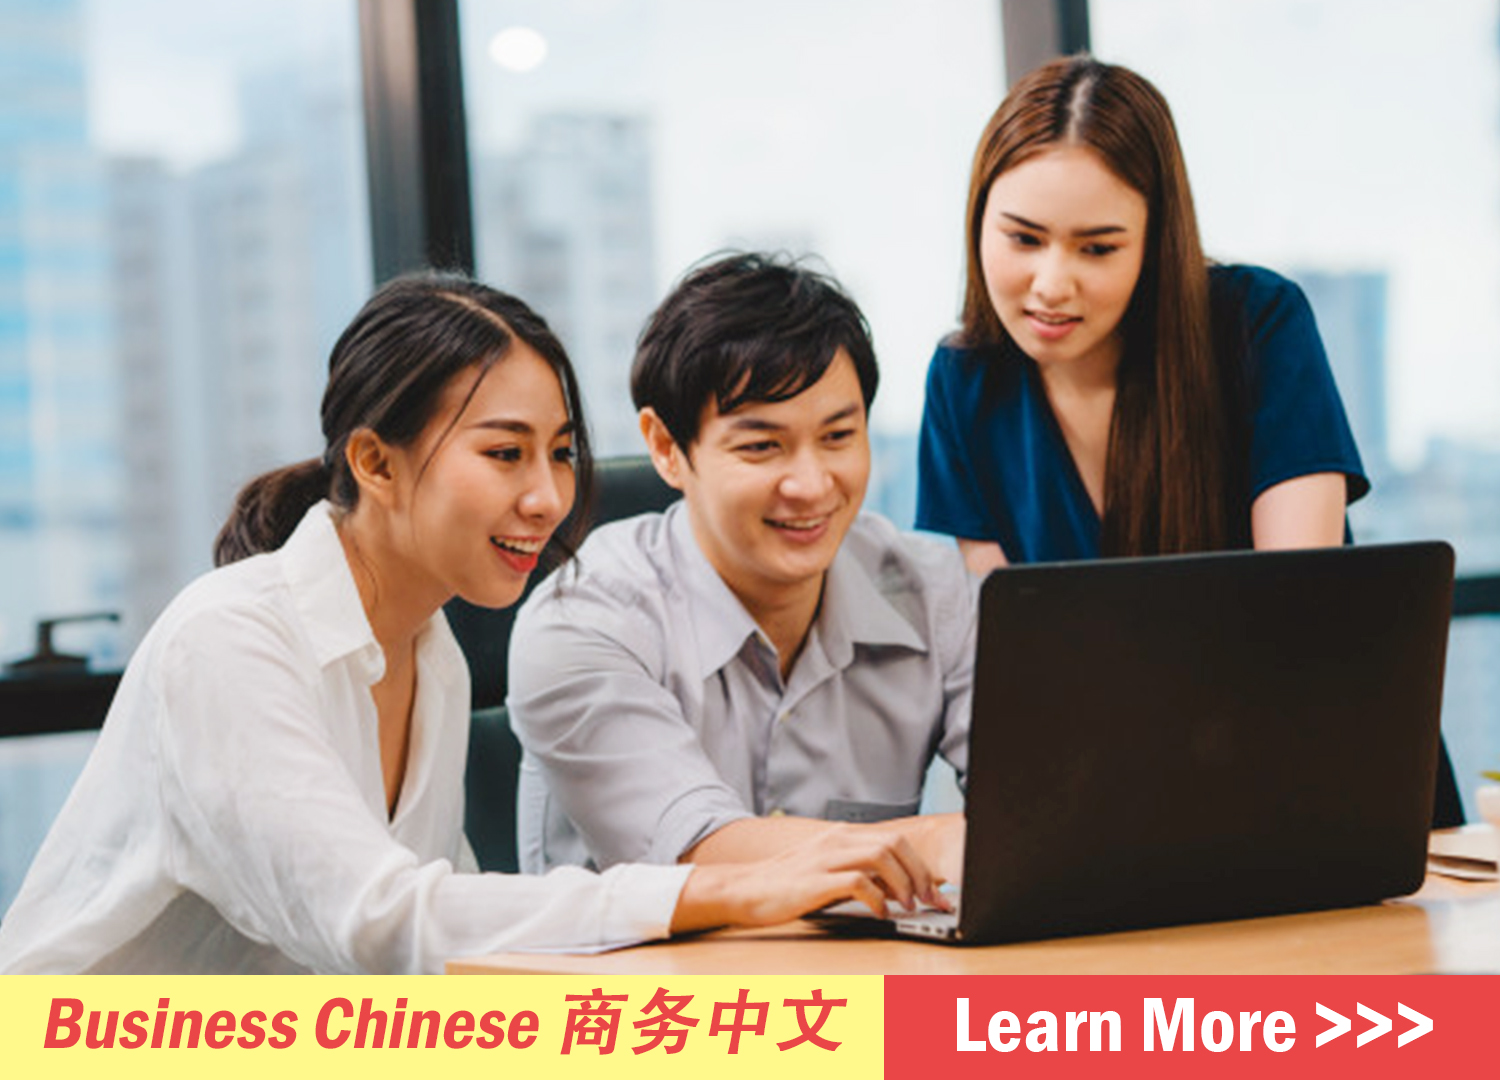 Business Chinese Elite Linguistic Network